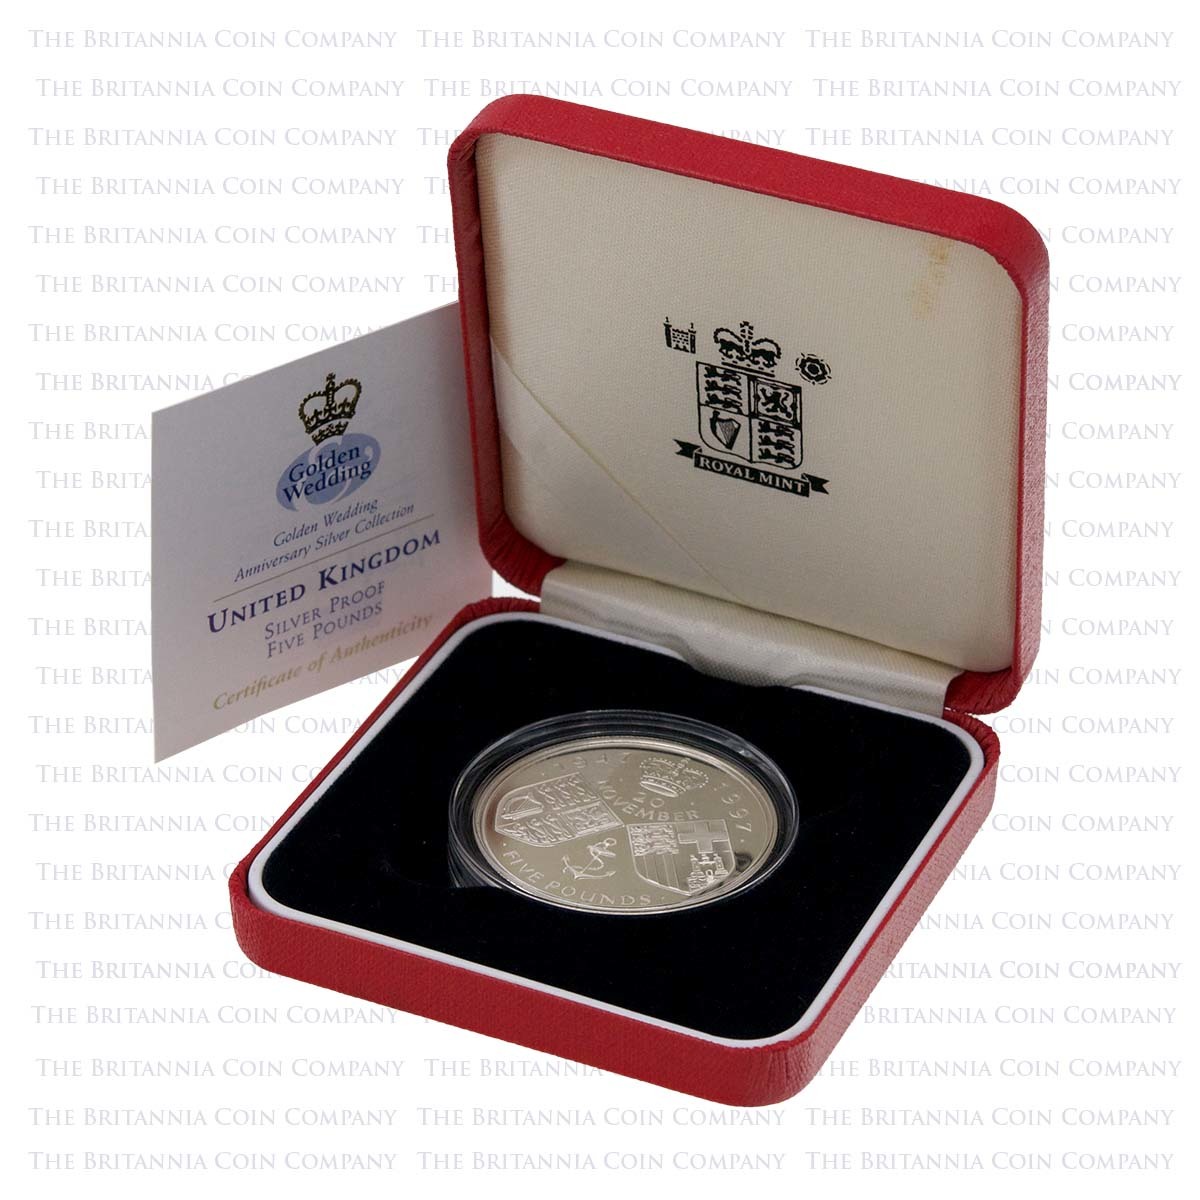 1997 Golden Wedding Anniversary £5 Silver Proof Boxed